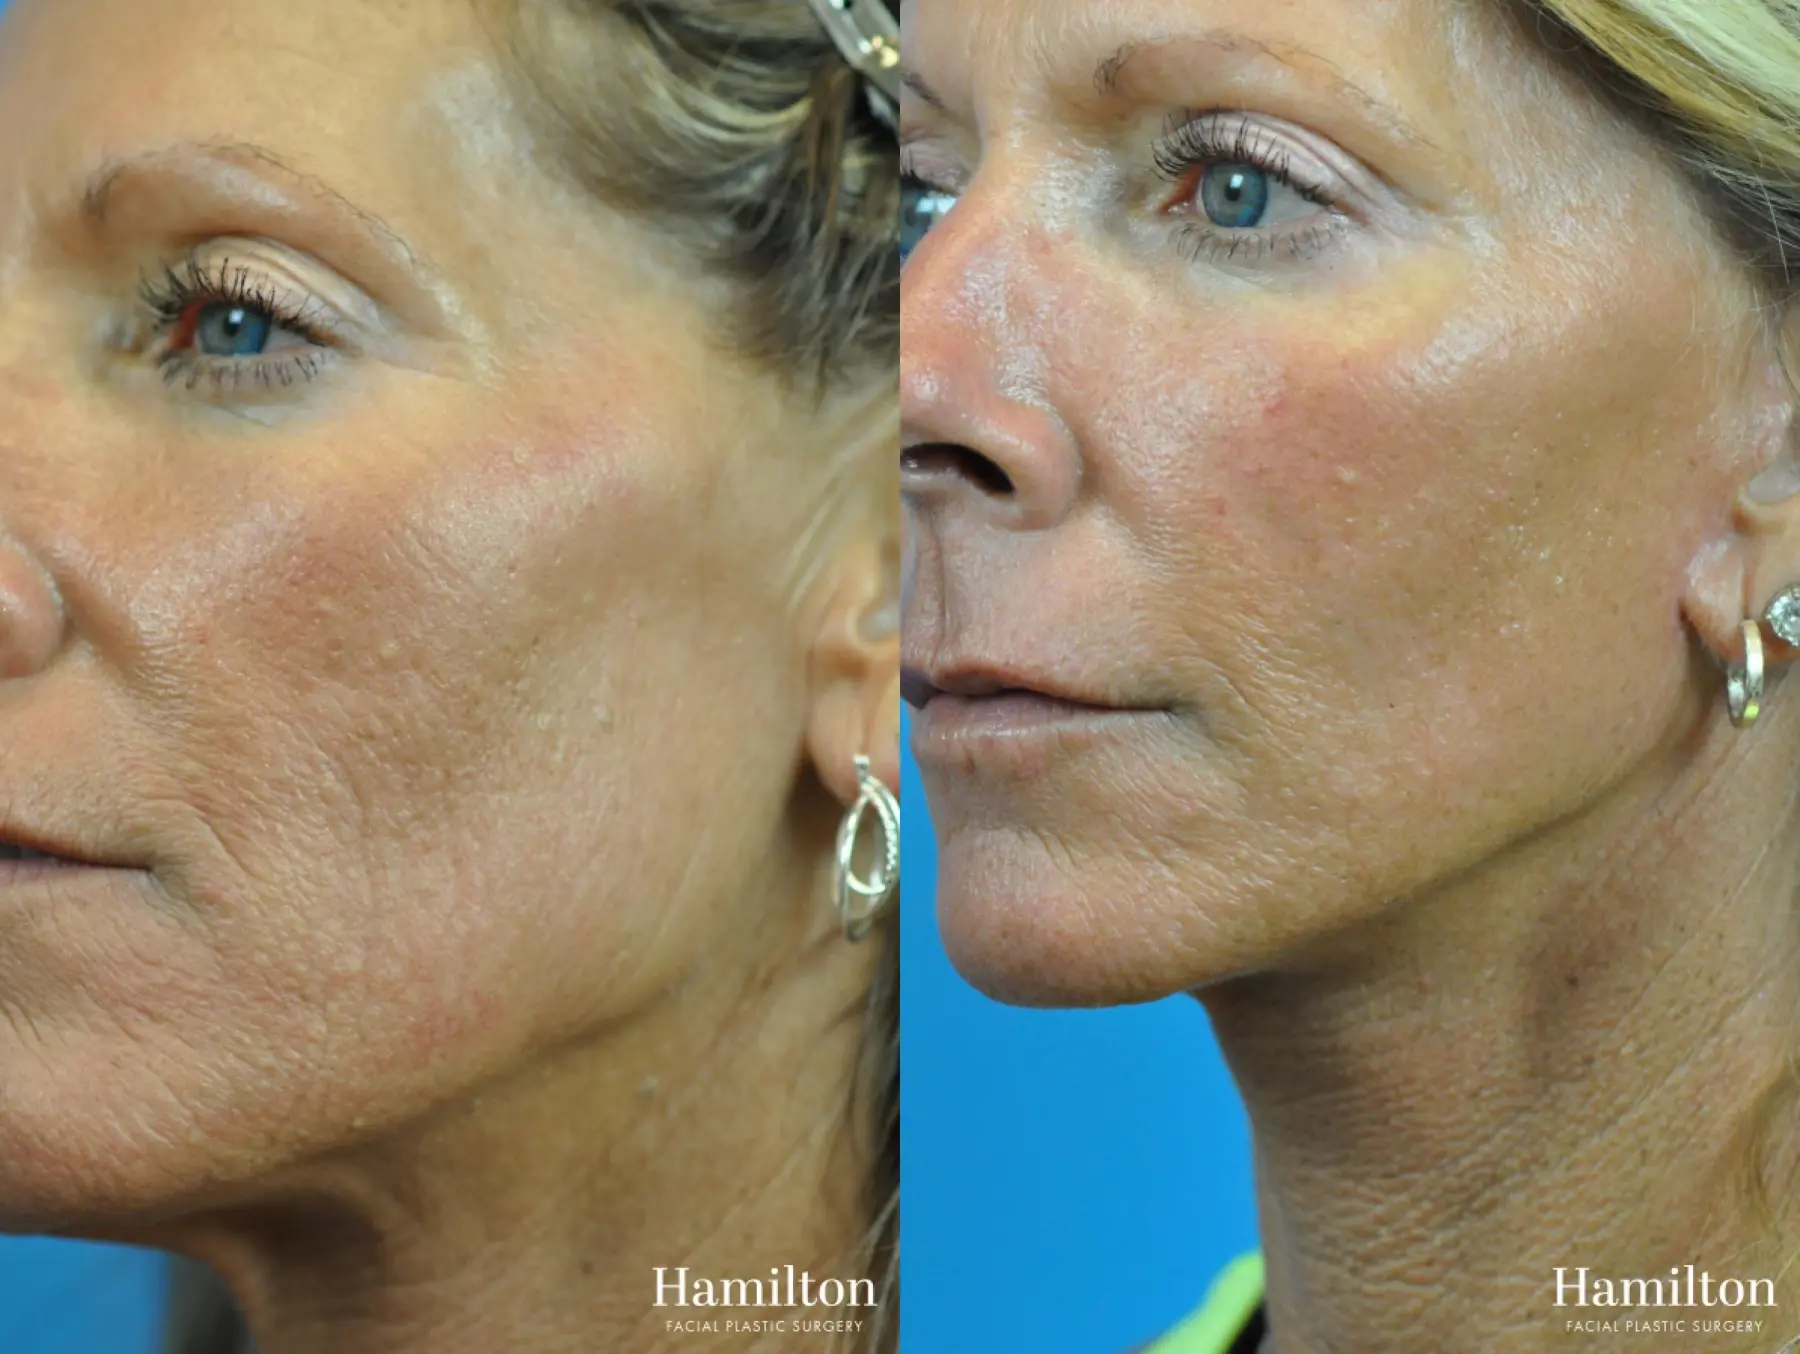 Mini Facelift: Patient 1 - Before and After 2